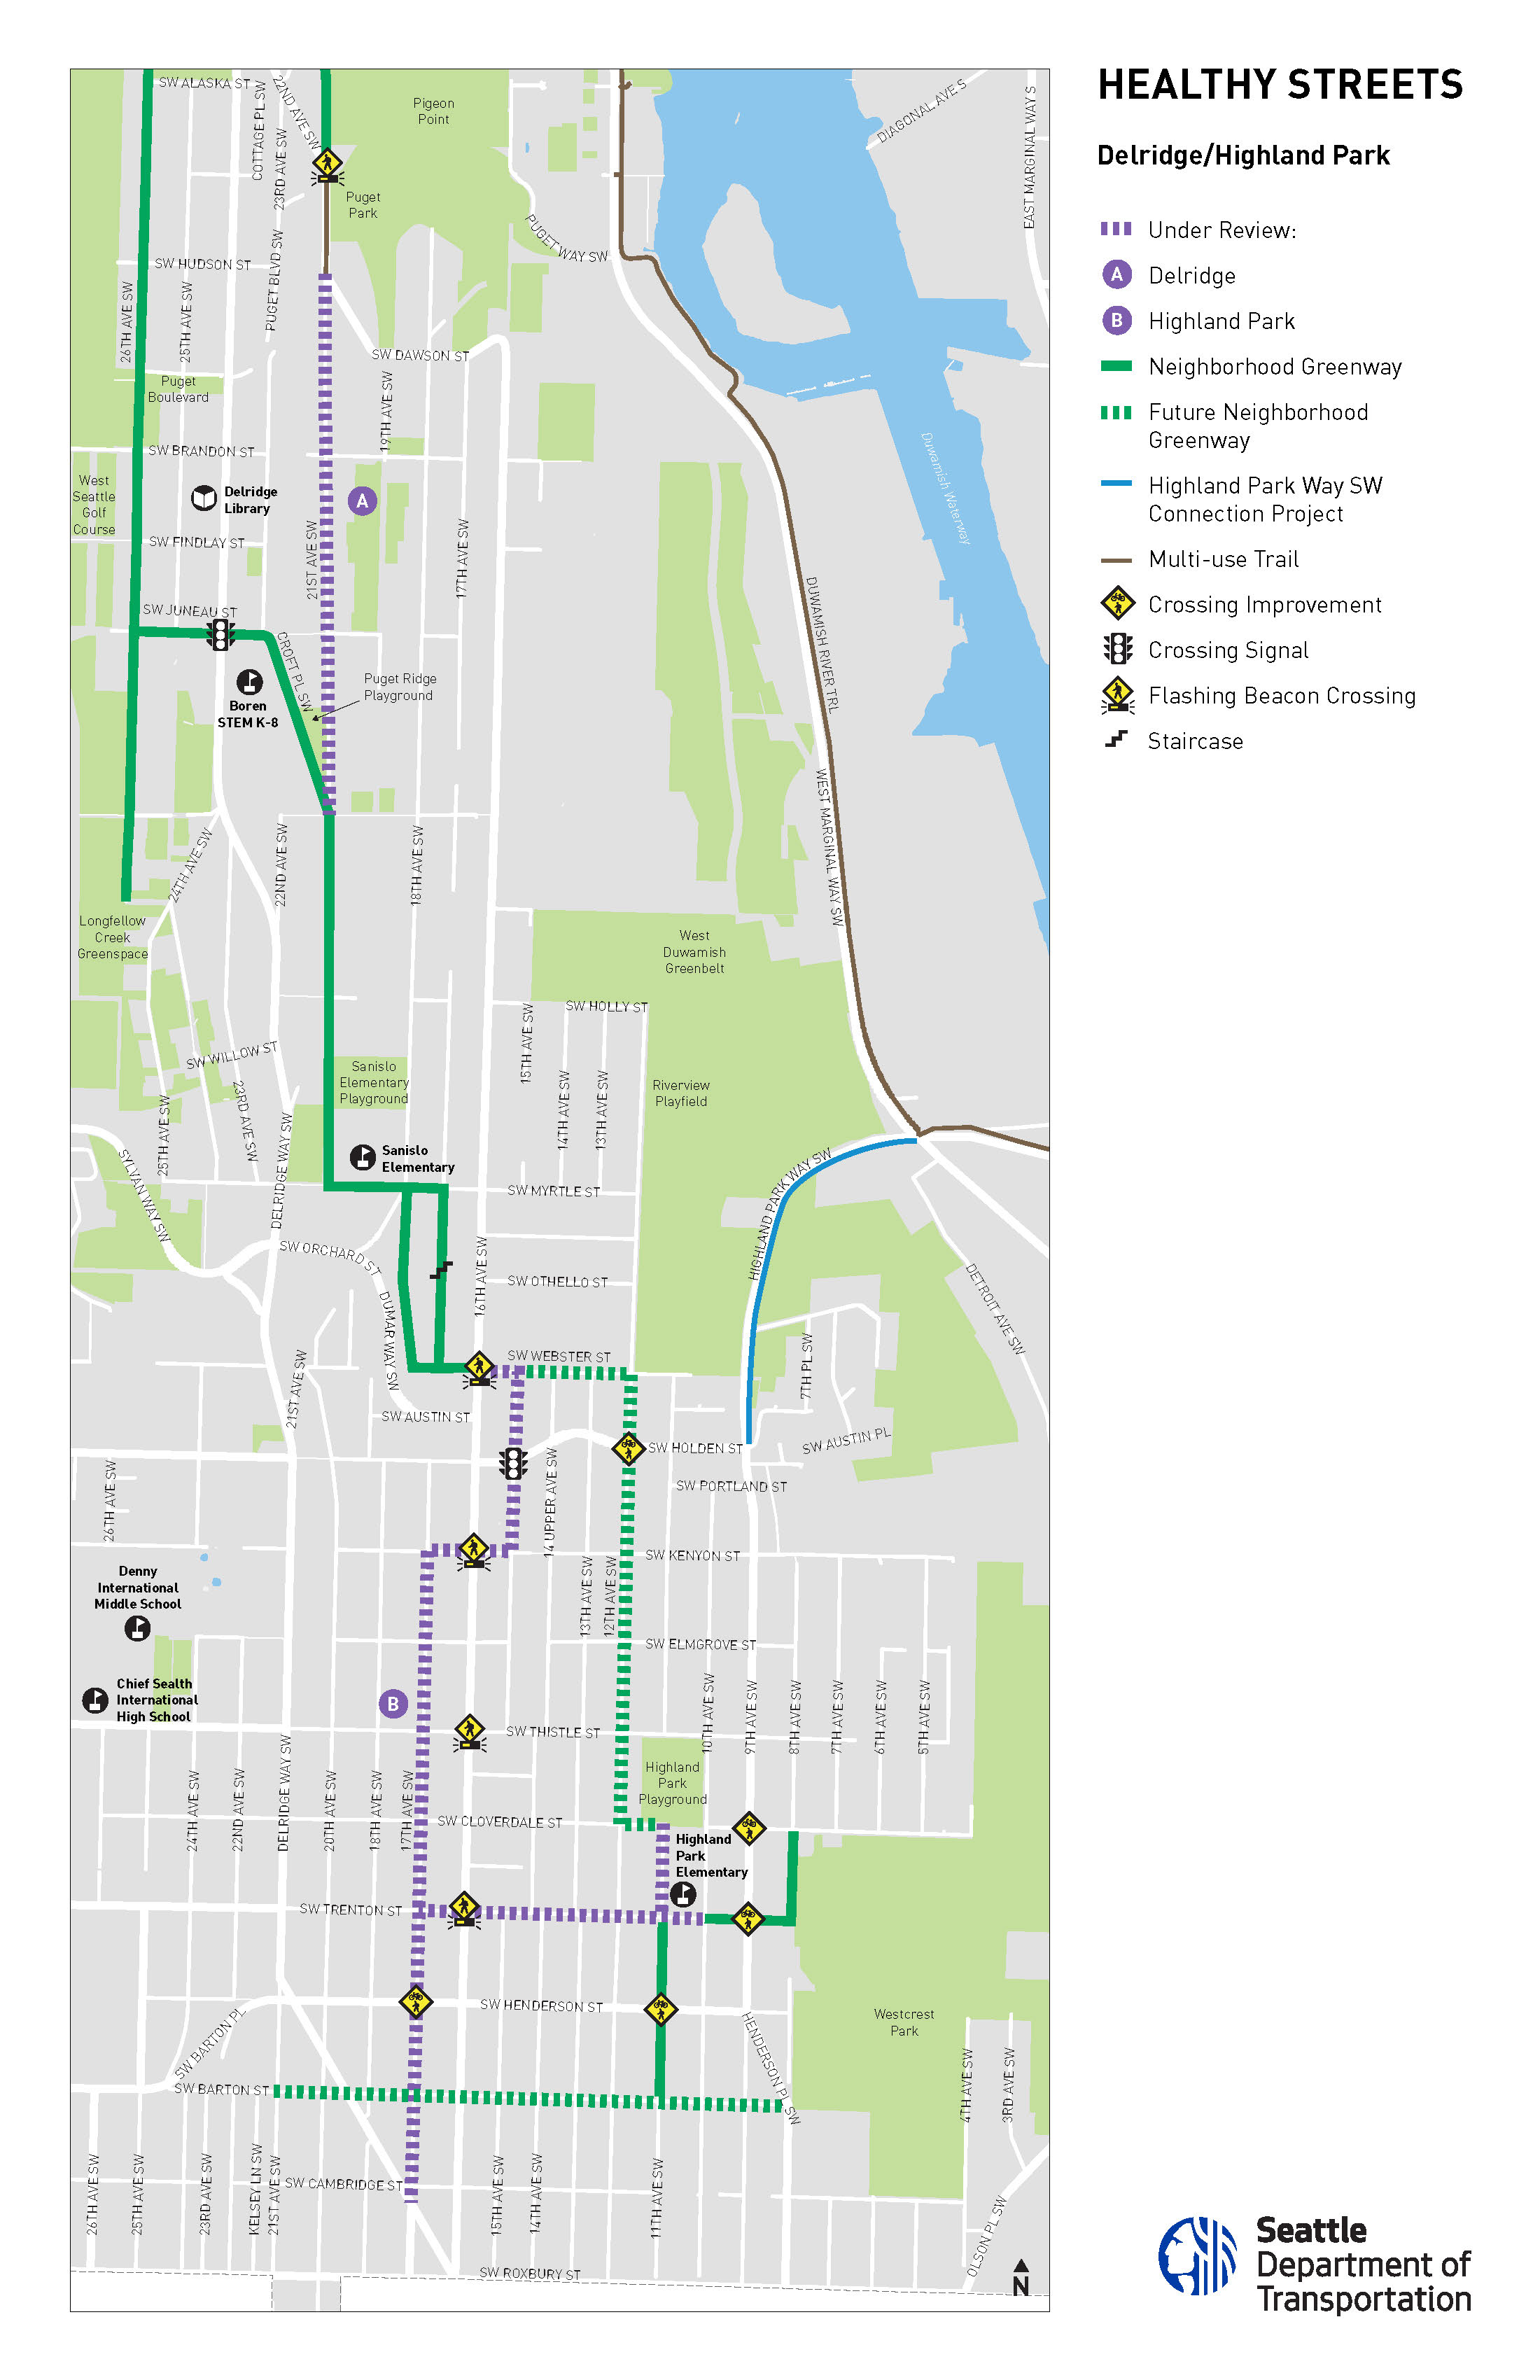 Map of Delridge and Highland Park Healthy Street segments under review